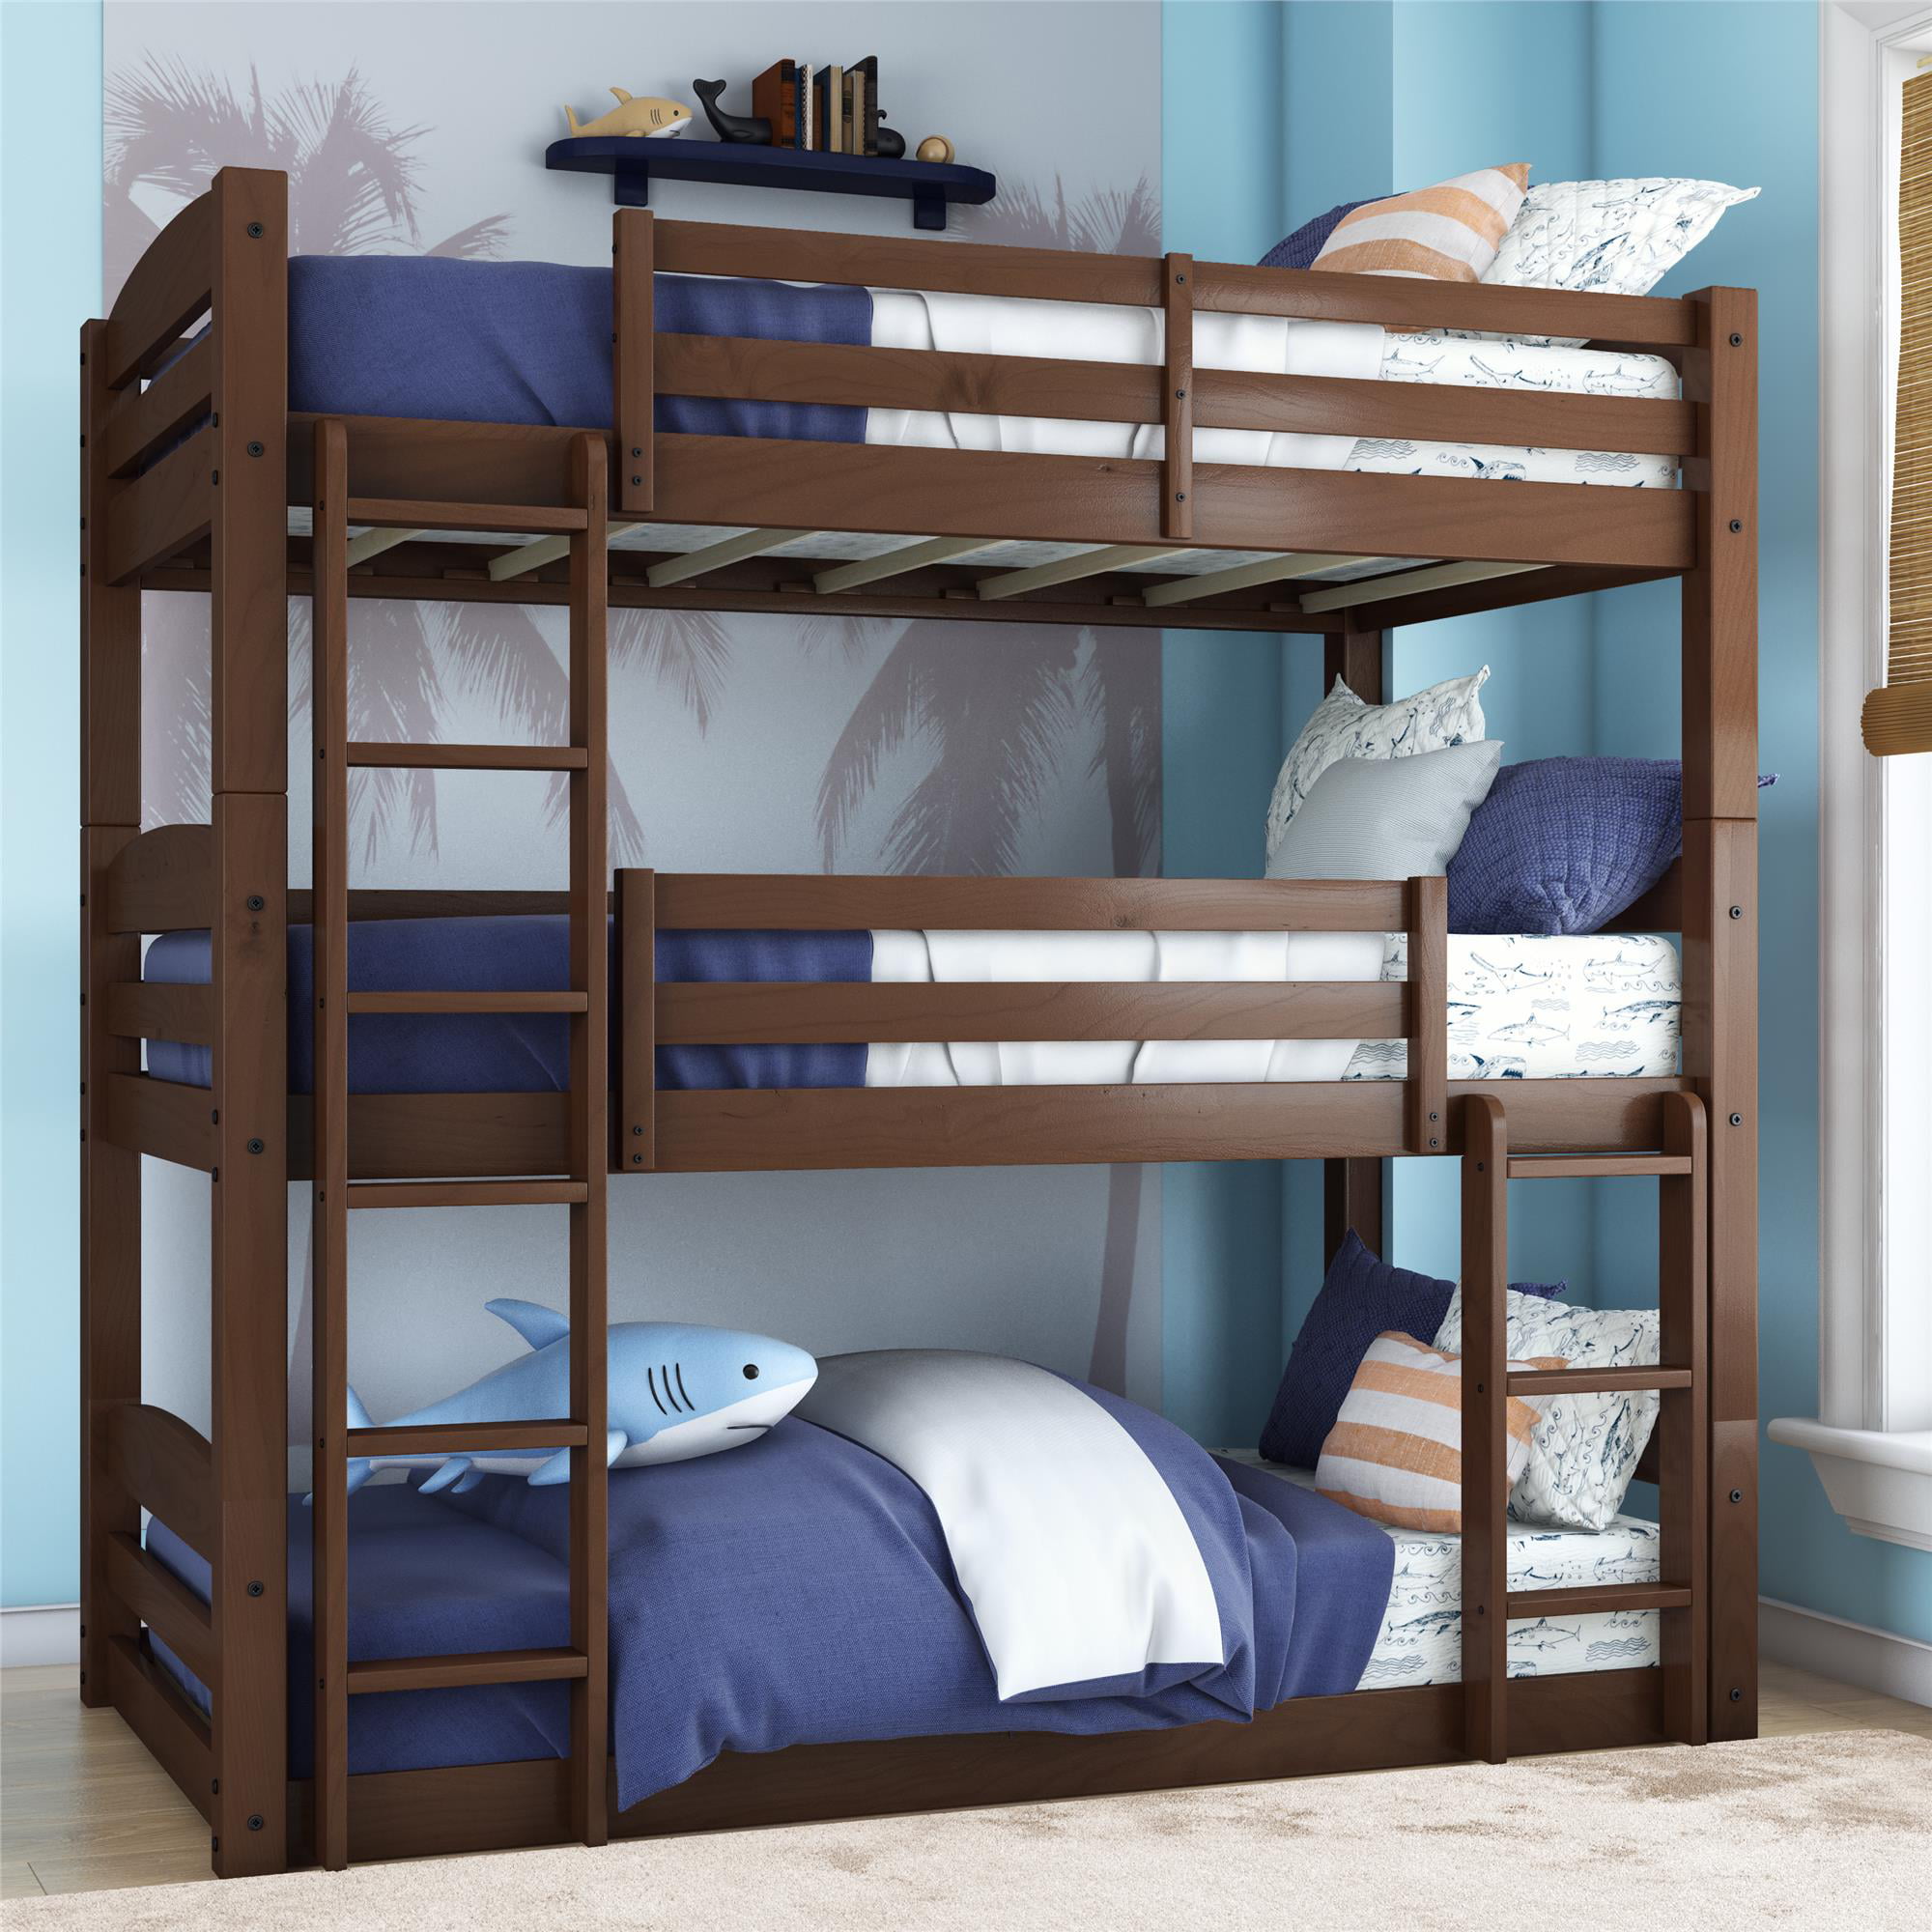 Better Homes And Gardens Tristan Wooden, Bunk Bed Height From Floor